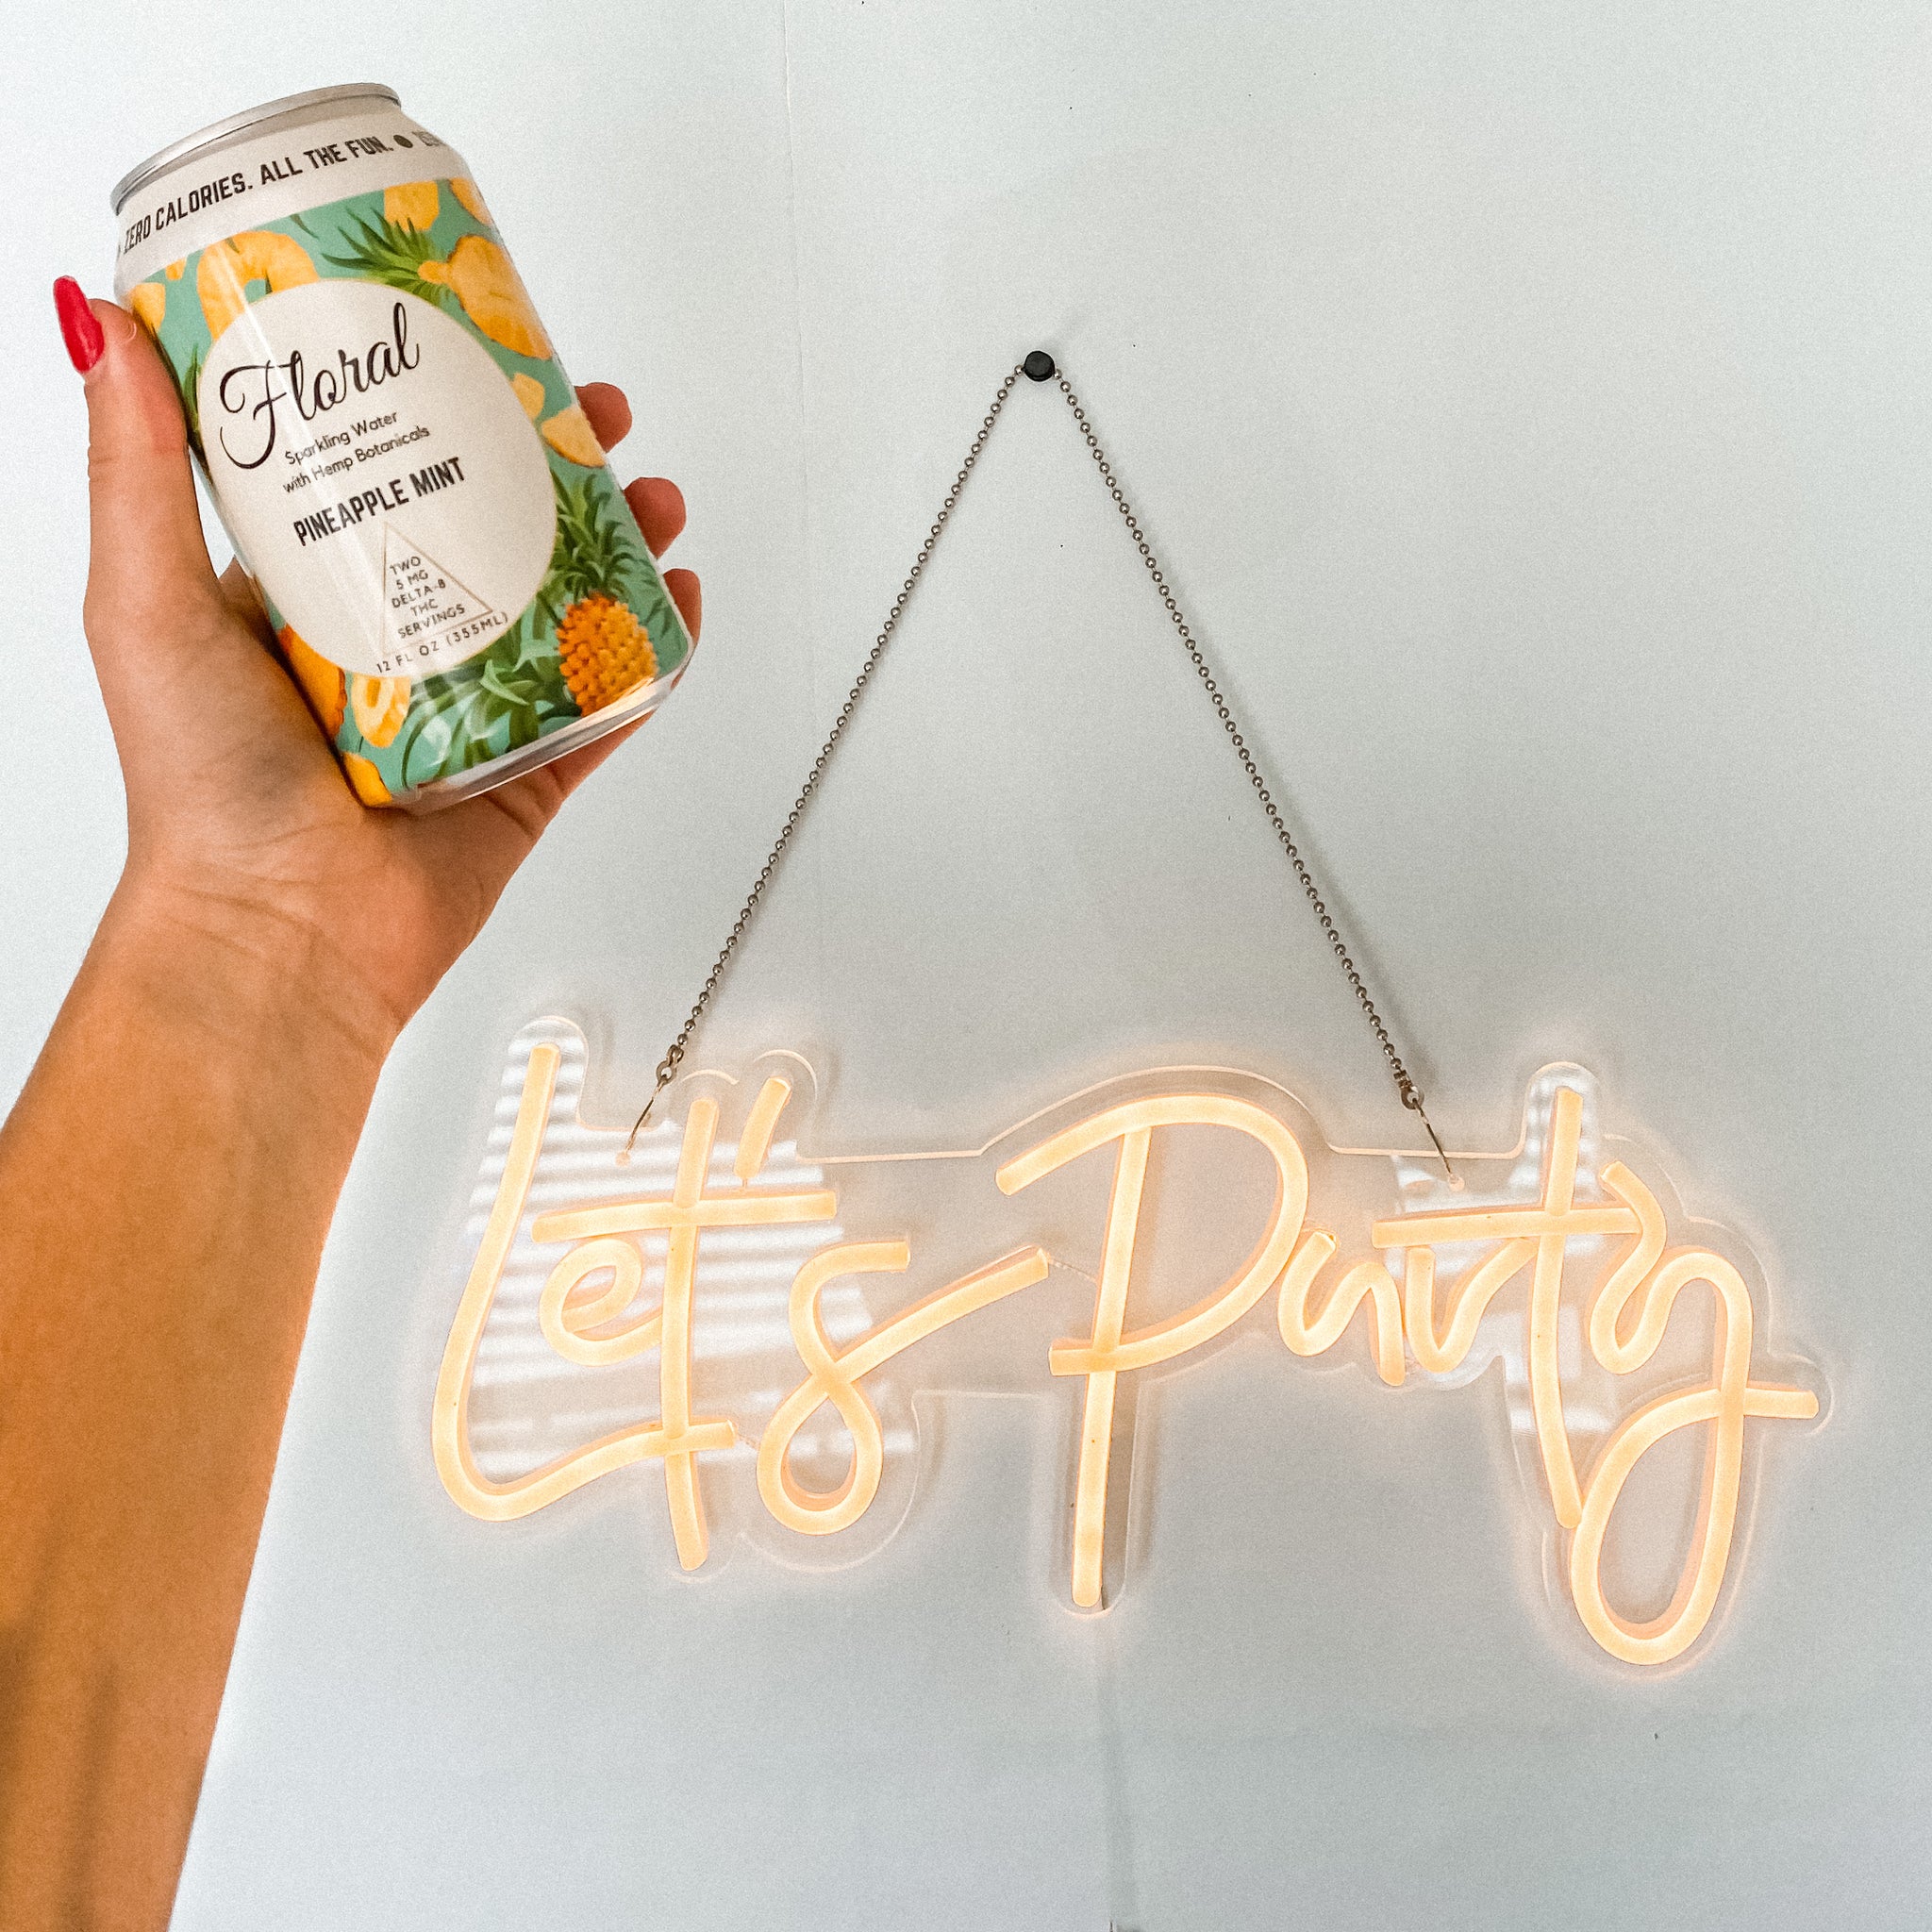 A hand holding a can of Floral Beverage's THC-infused sparkling water in the flavor Pineapple Mint in front of a neon-lit sign that reads "Let's Party."